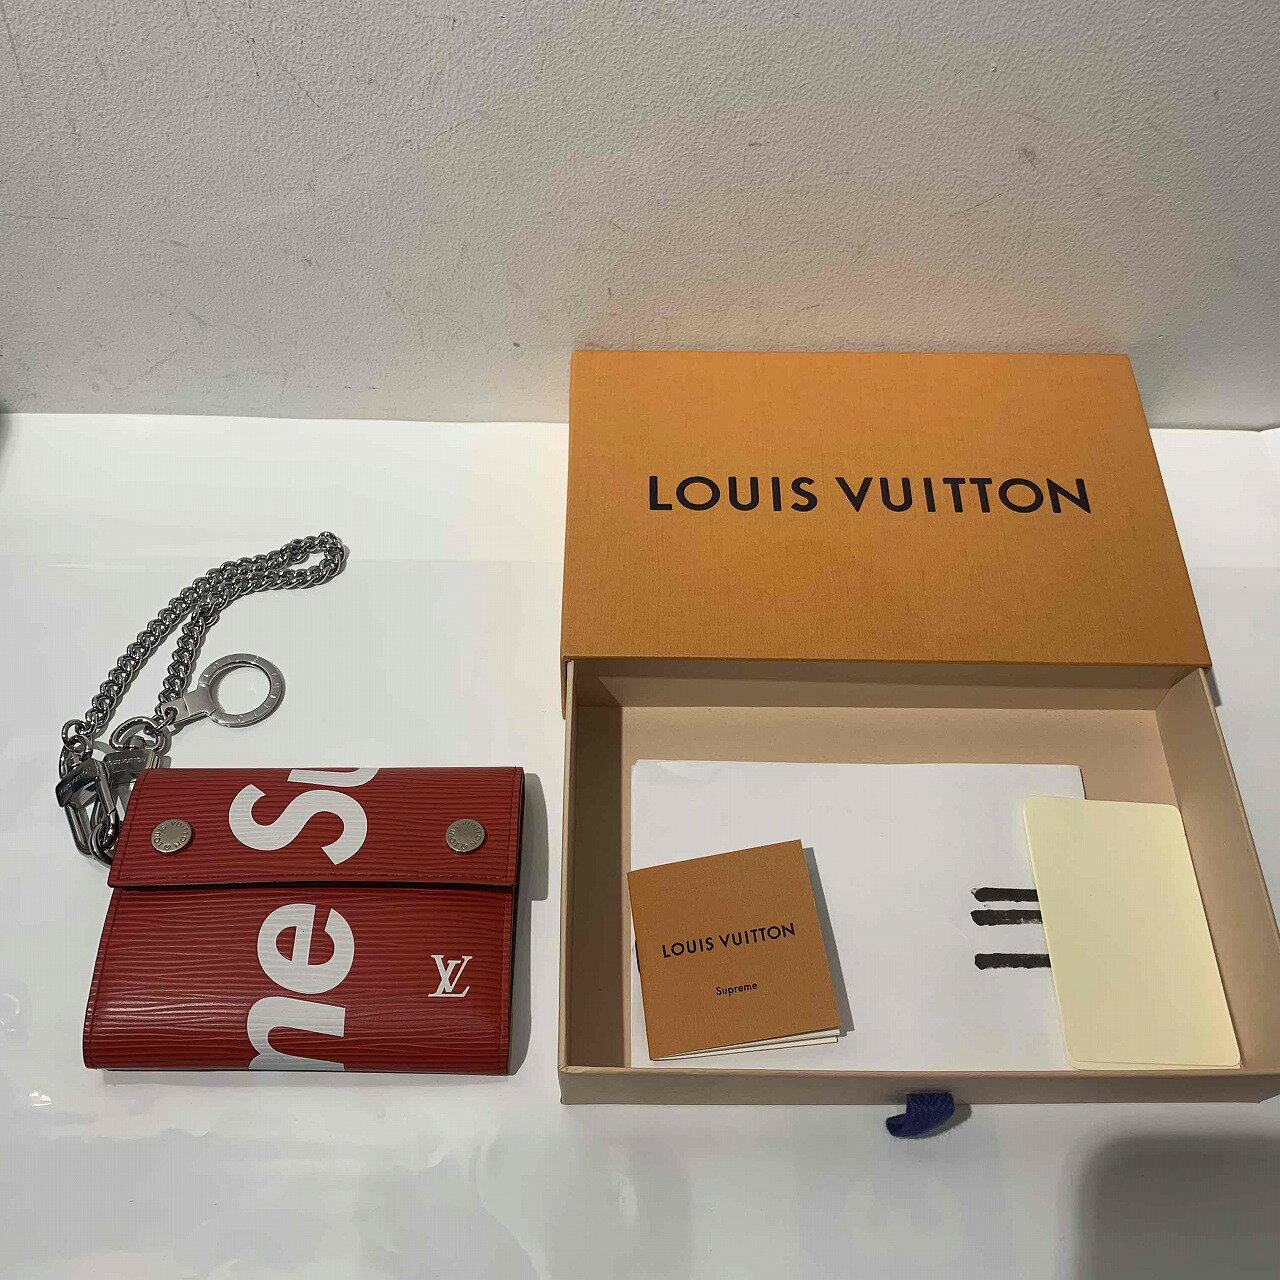 LOUIS VUITTON 17aw SUPREME CHAIN WALLET EPI AND TAIGA M67755 ルイヴィトン シュプリーム チェーンウォレット エピアンドタイガ 財布 心斎橋店【中古】